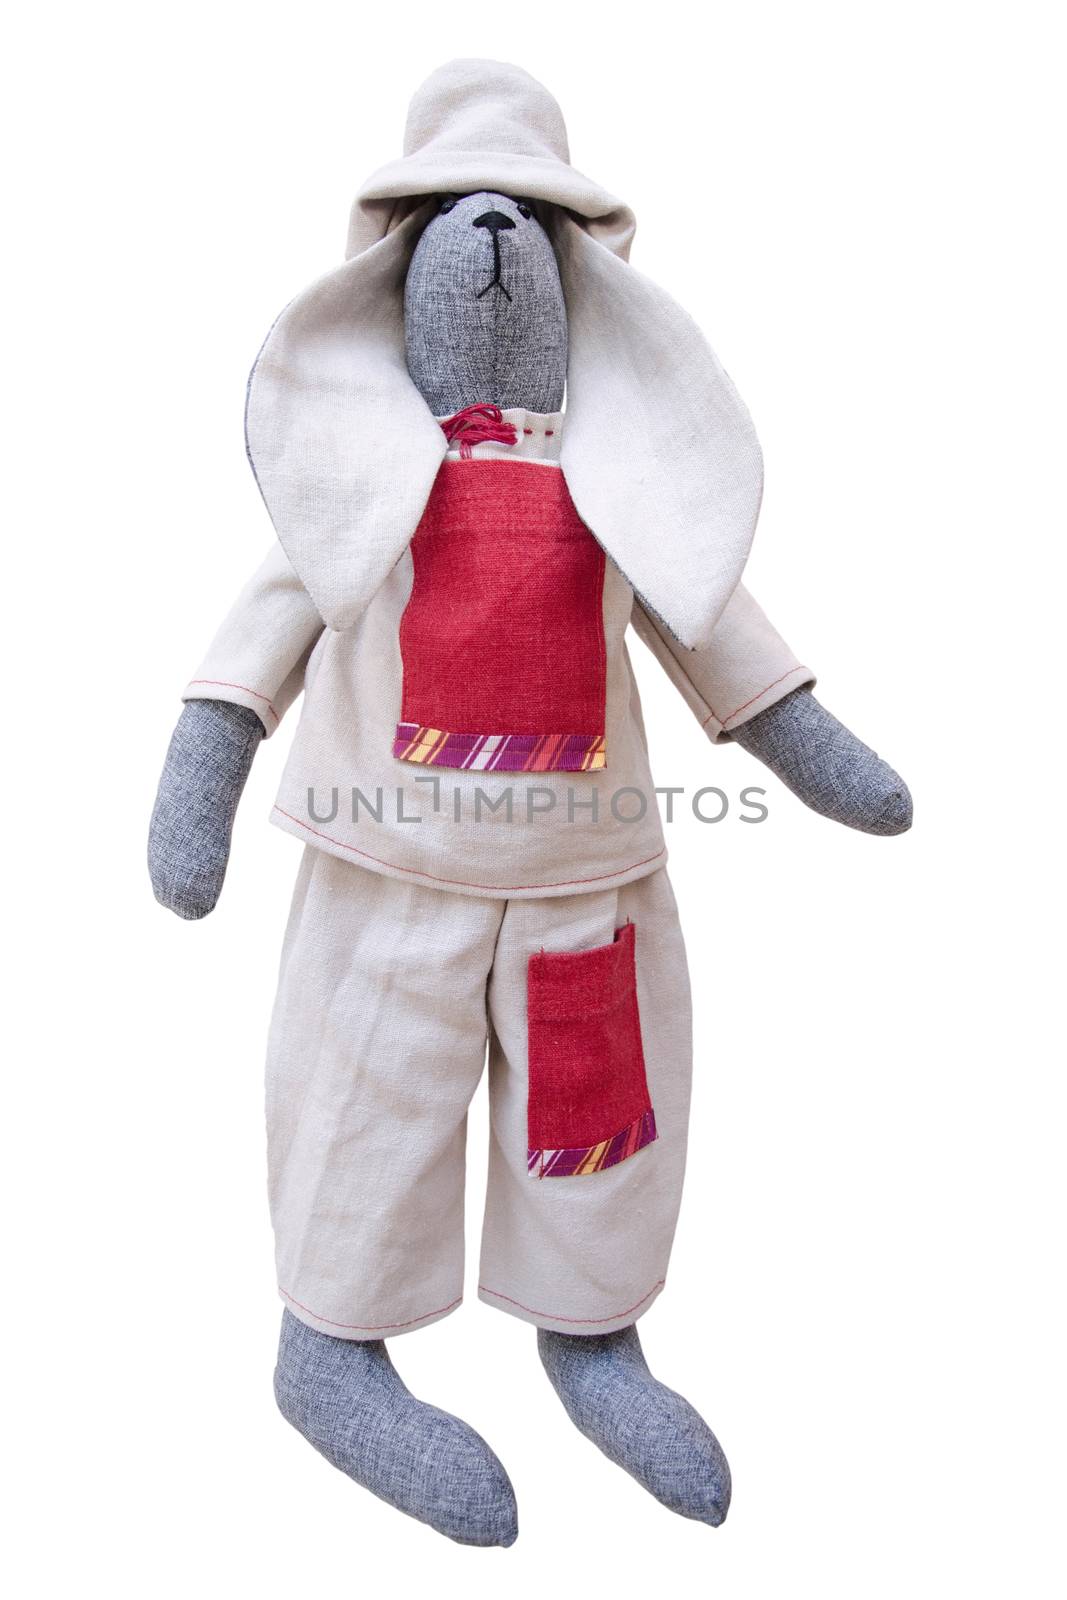 The isolated handmade doll bunny in homespun jacket, pants with pockets and a fishing hat